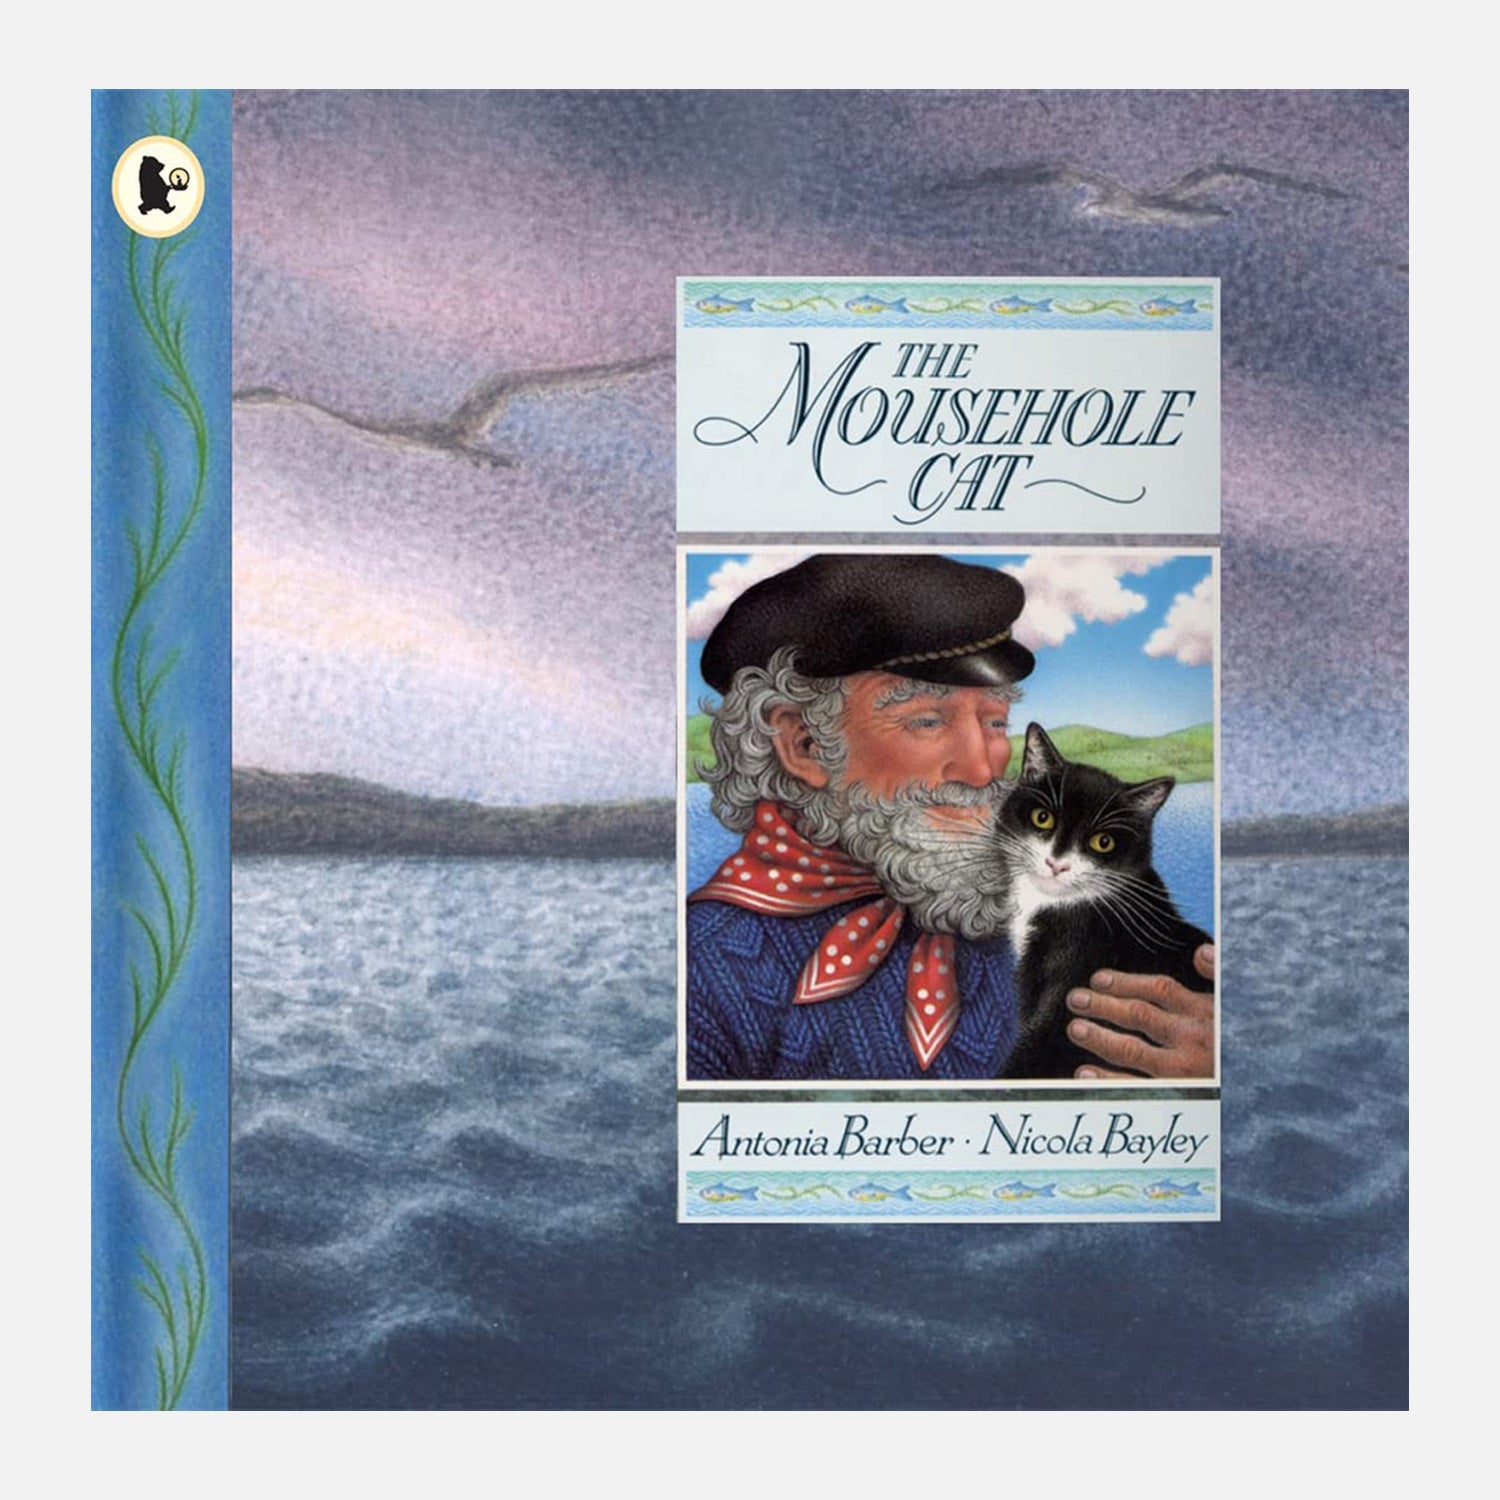 The Mousehole Cat picture book with image of a fisherman cuddling a cat on the cover